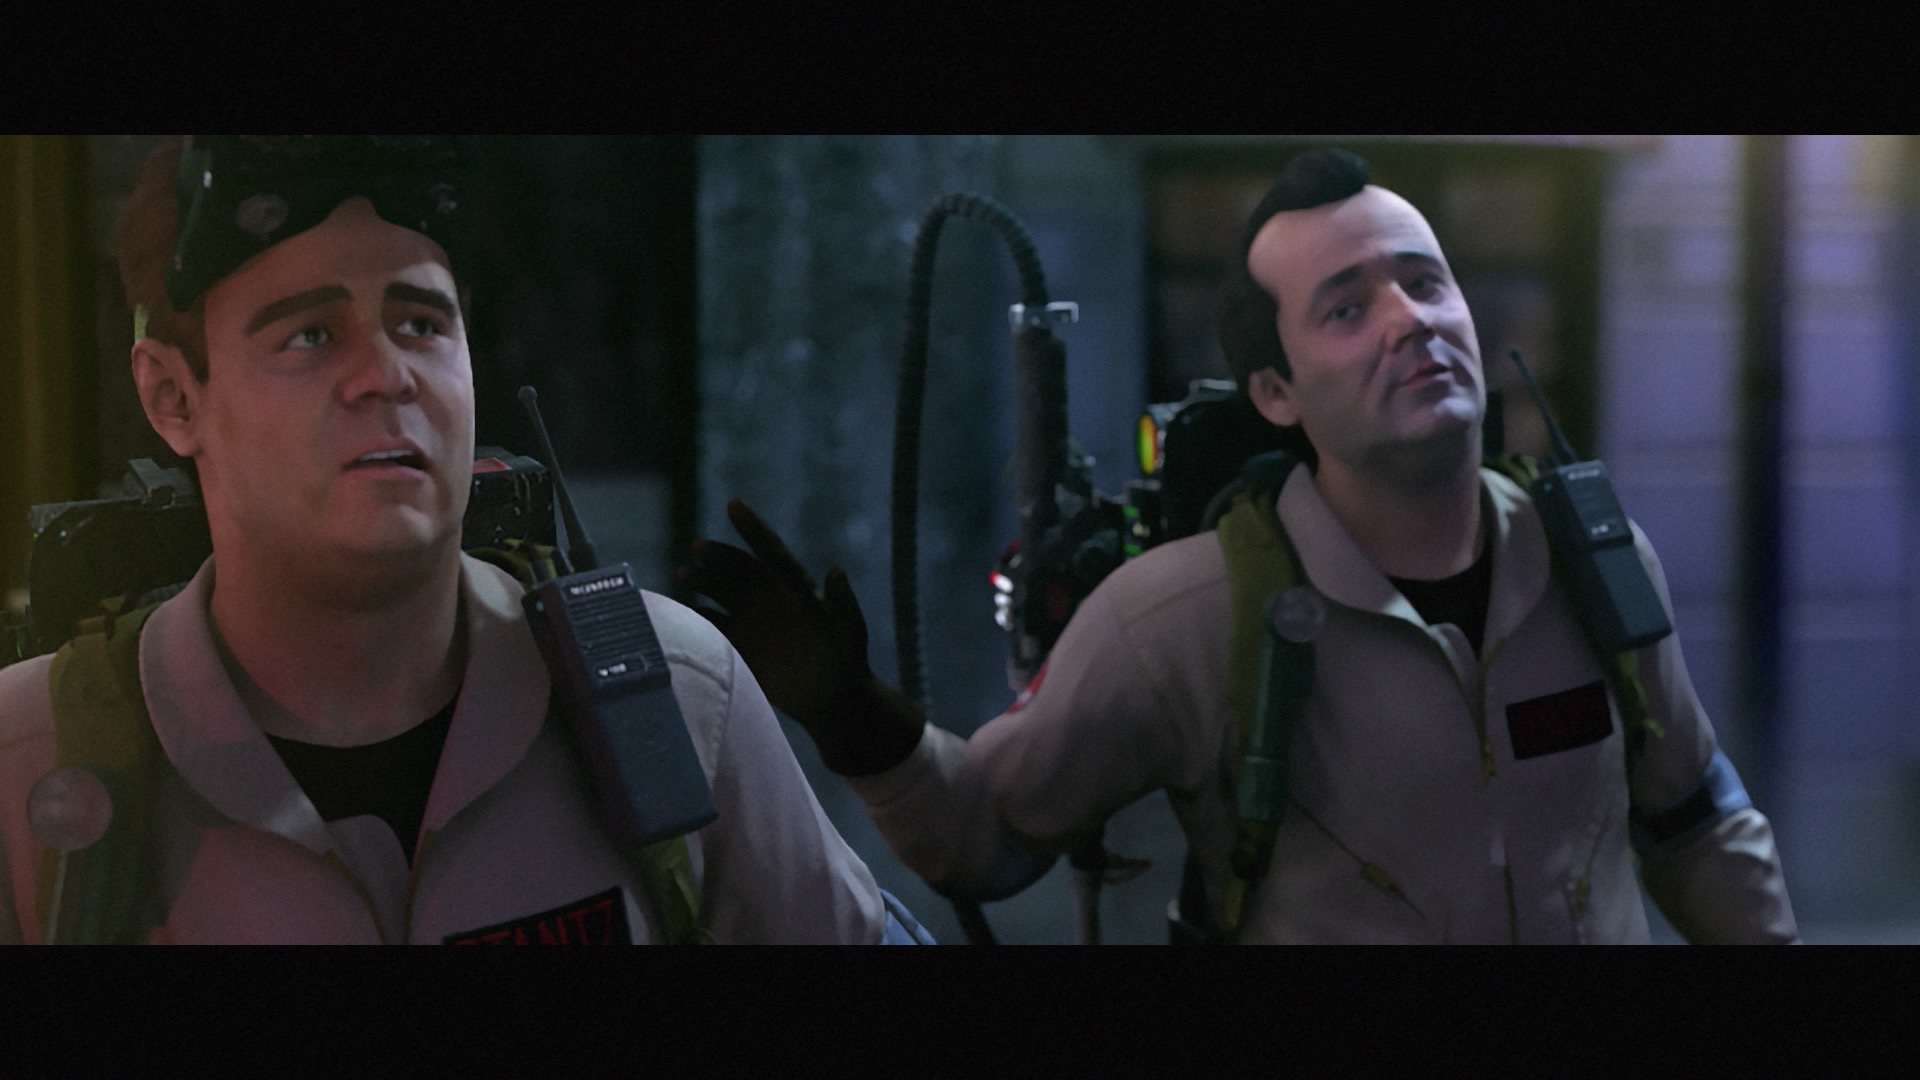 A typical cutscene from Ghostbusters: The Videogame Remastered, using the original cast